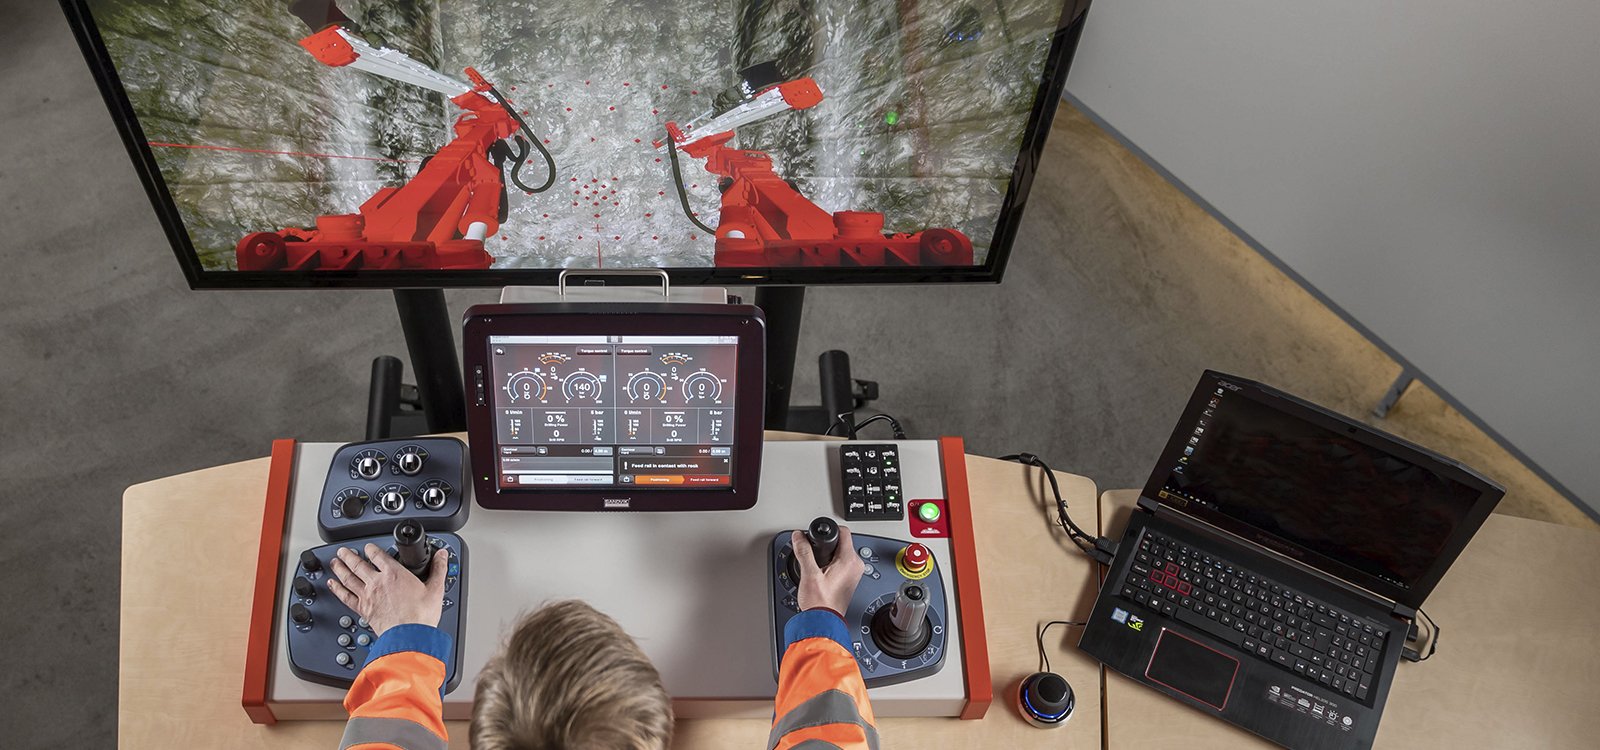 <p>The new simulator delivers virtual training on a variety of drill rigs, helping operators improve their performance.</p>
